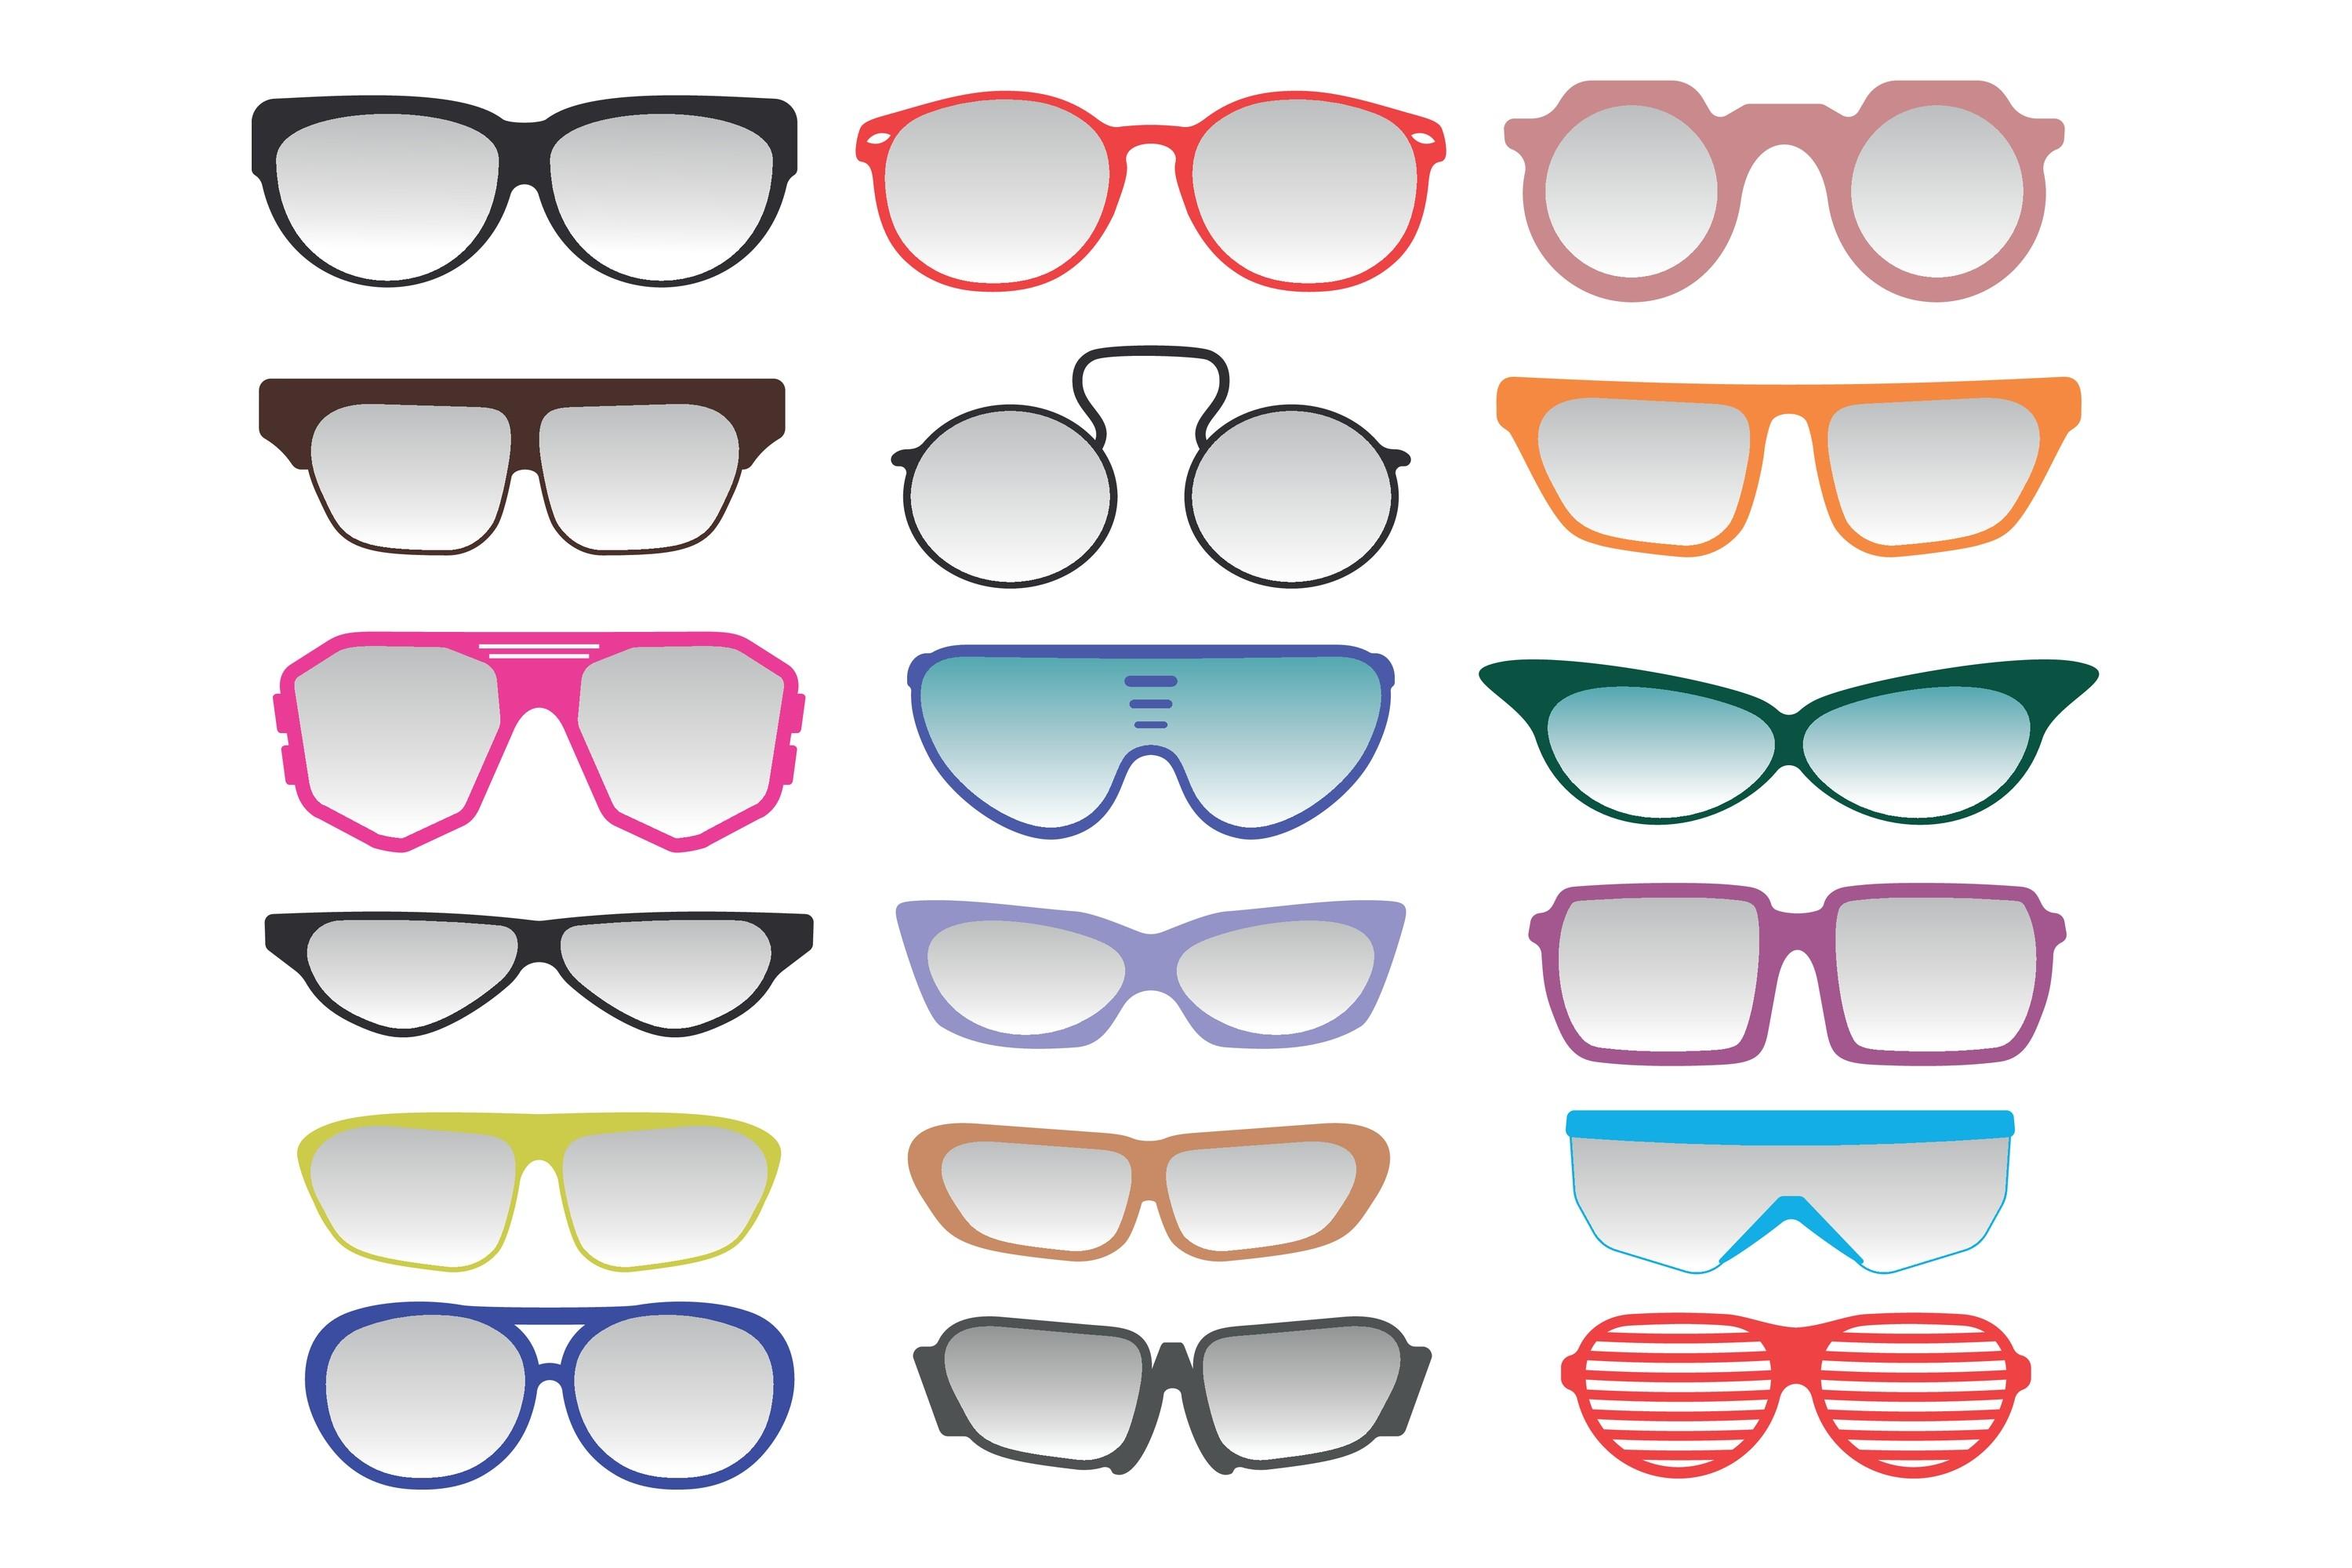 Glasses and Sunglasses Collection